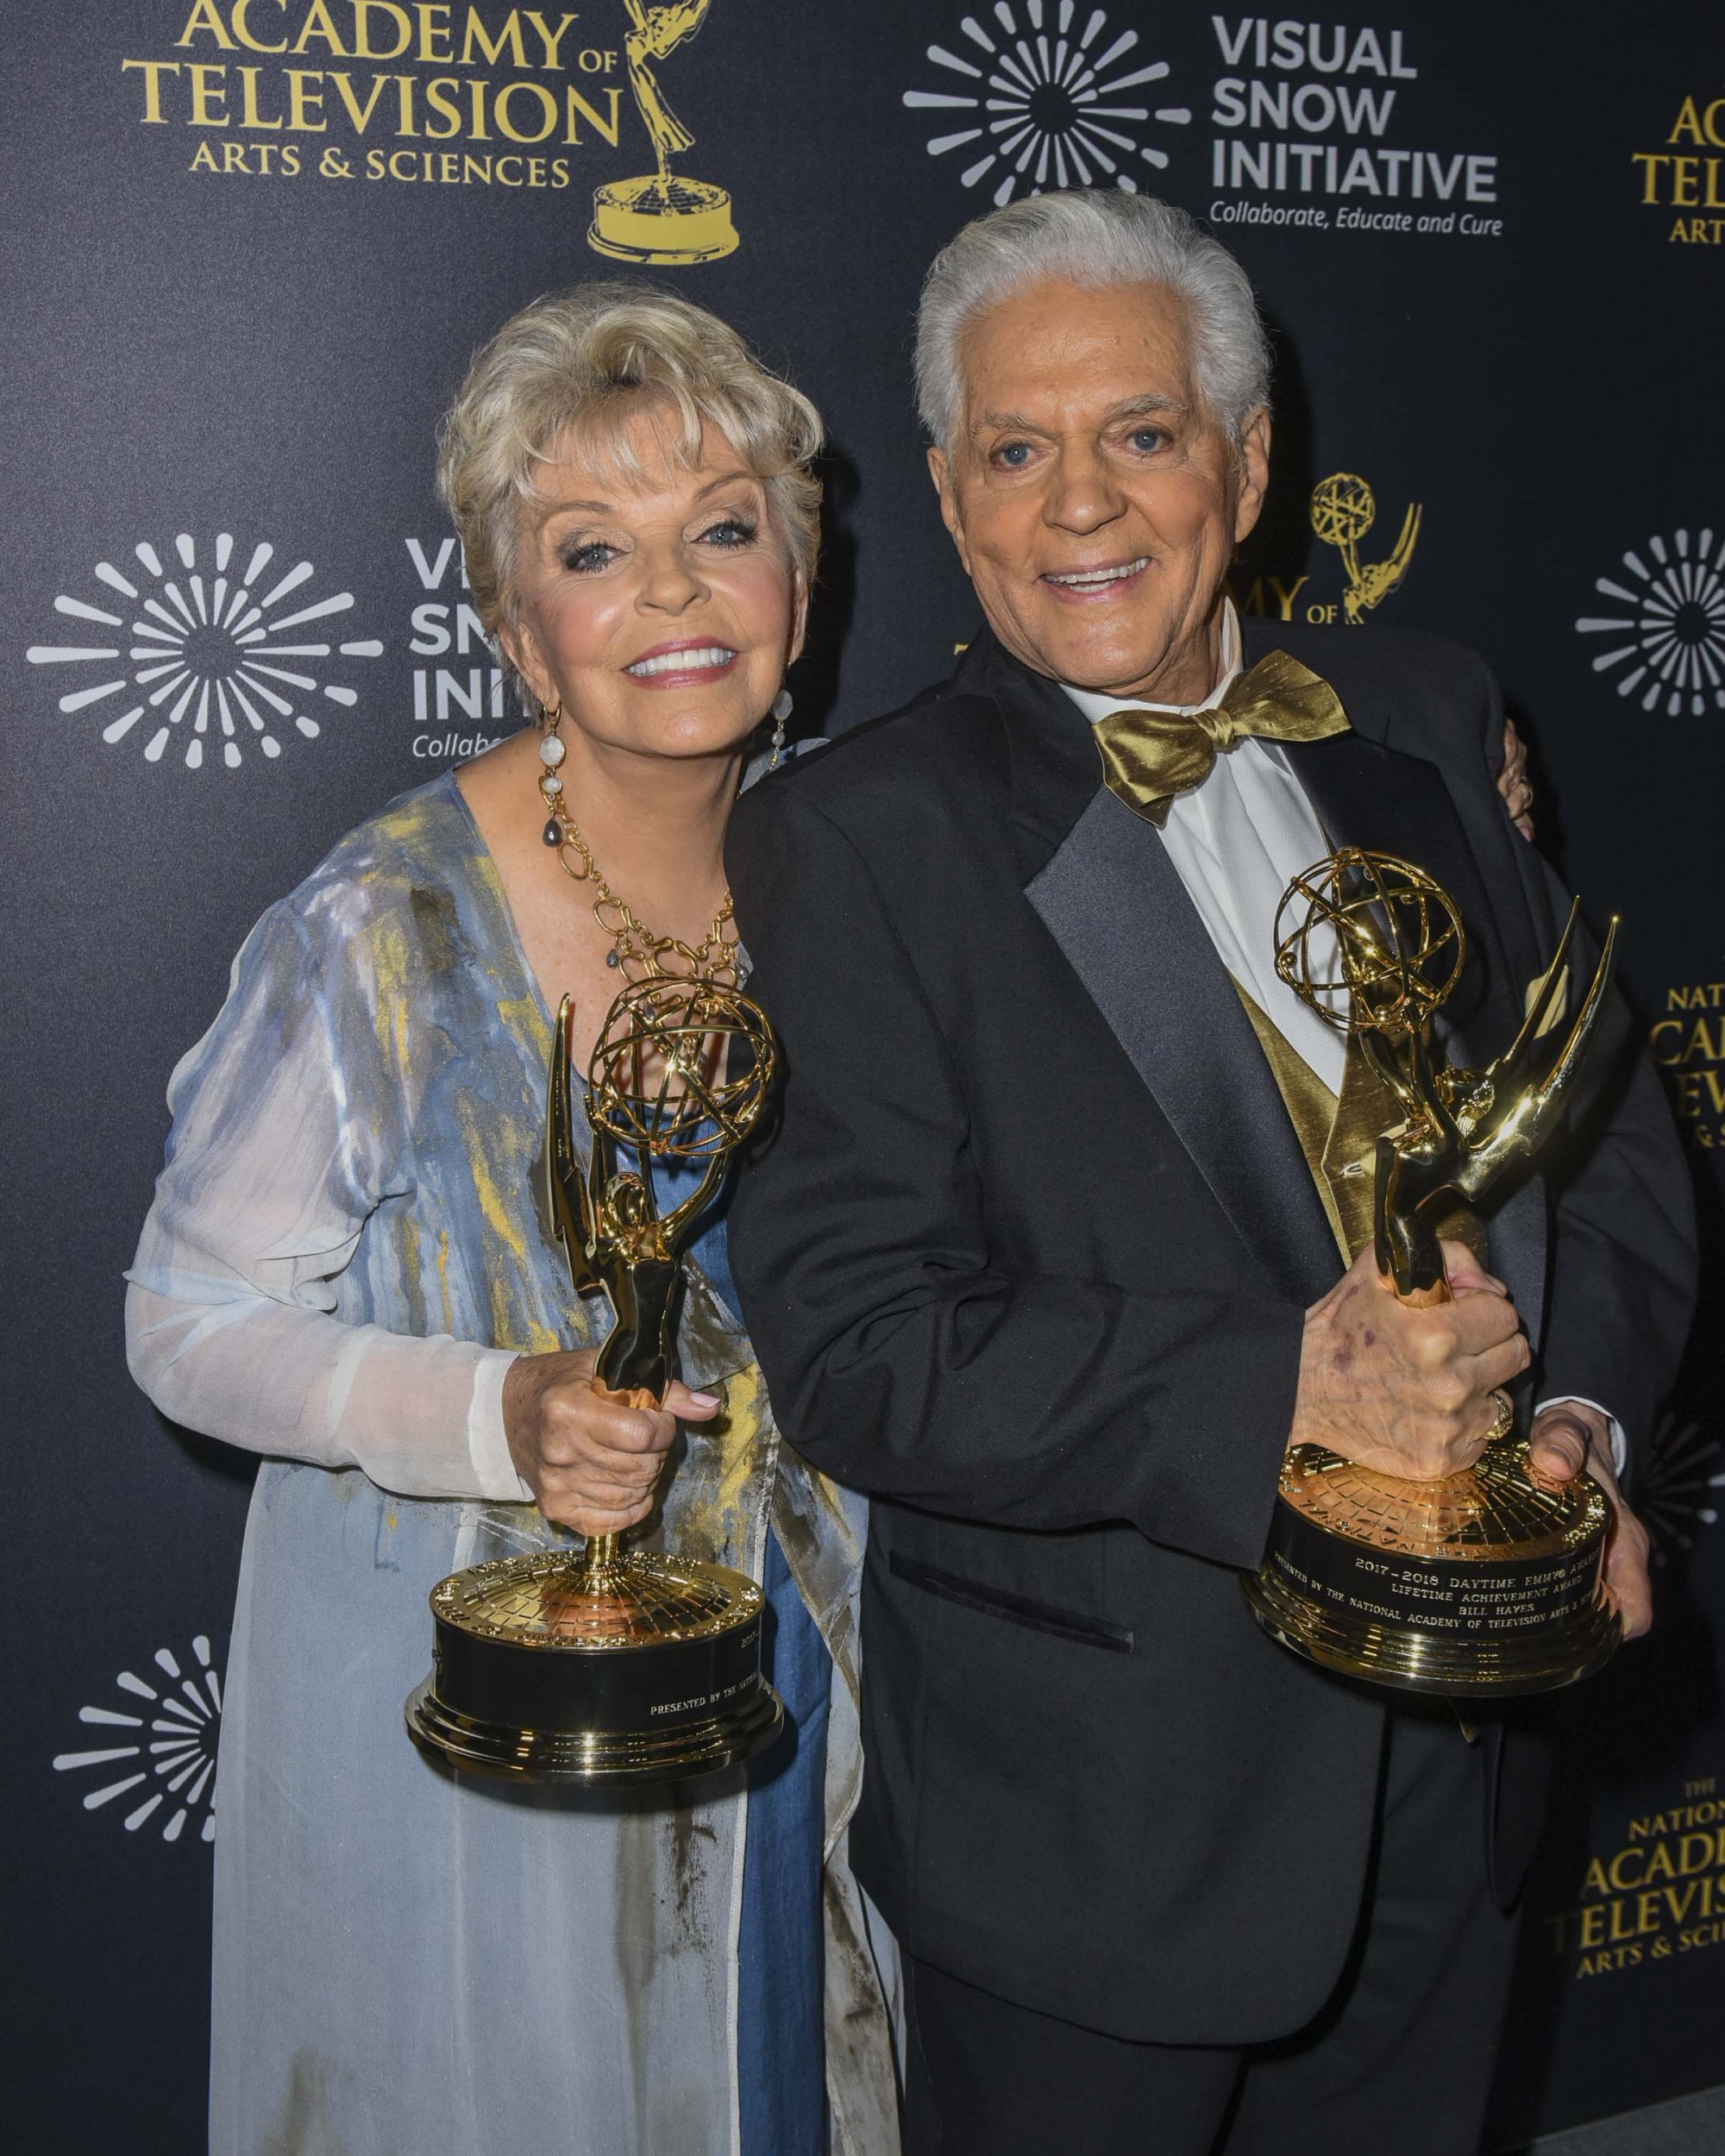 Bill Hayes and Susan Seaforth Hayes attend the 45th Daytime Emmy Awards on April 29, 2018, in Los Angeles, California